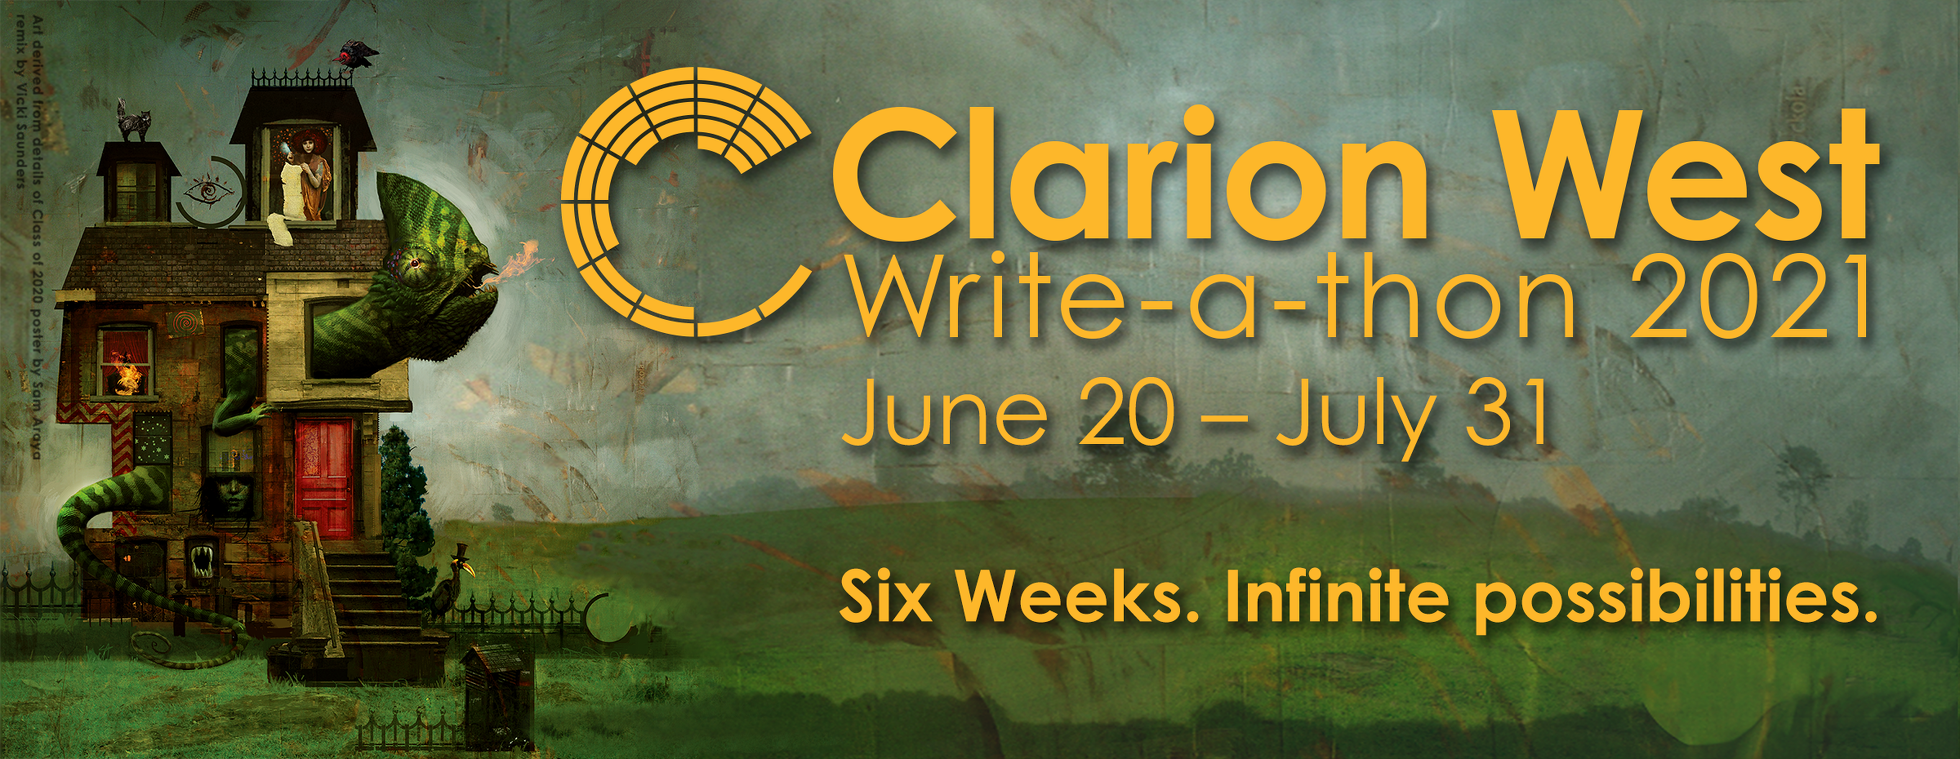 Clarion West Write-a-thon